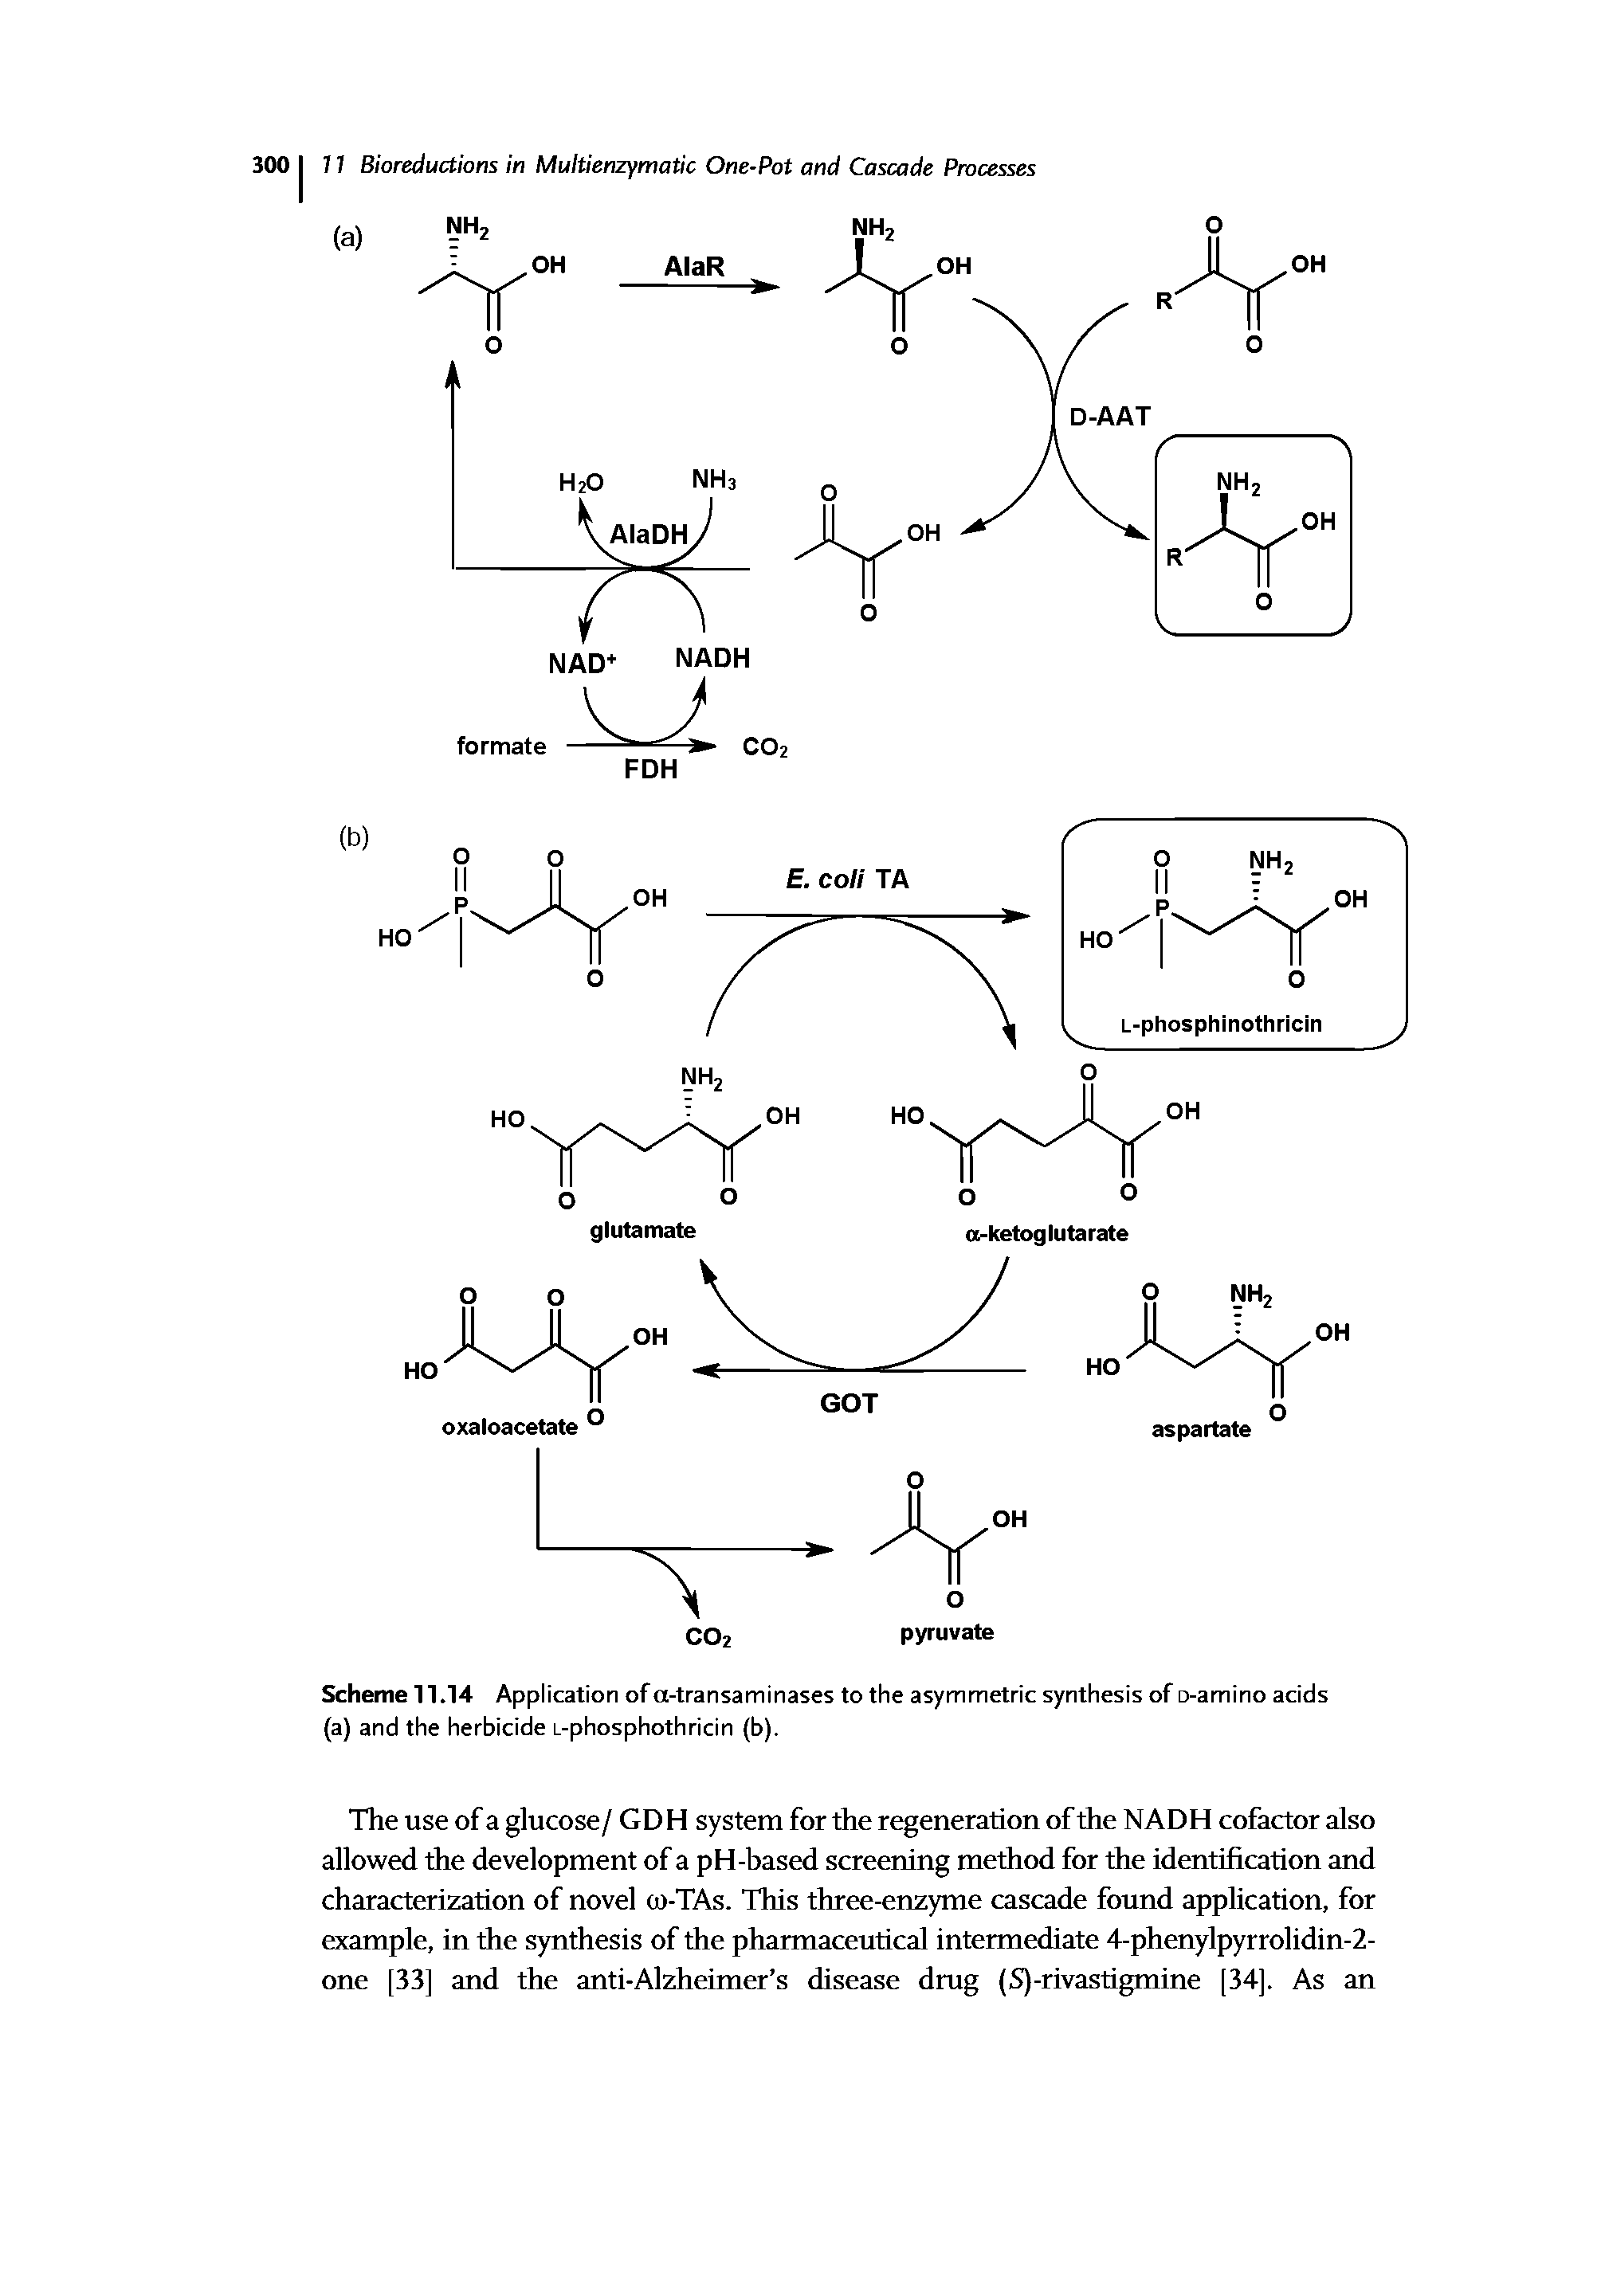 Scheme 11.14 Application ofa-transaminases to the asymmetric synthesis of o-amino acids (a) and the herbicide L-phosphothricin (b).